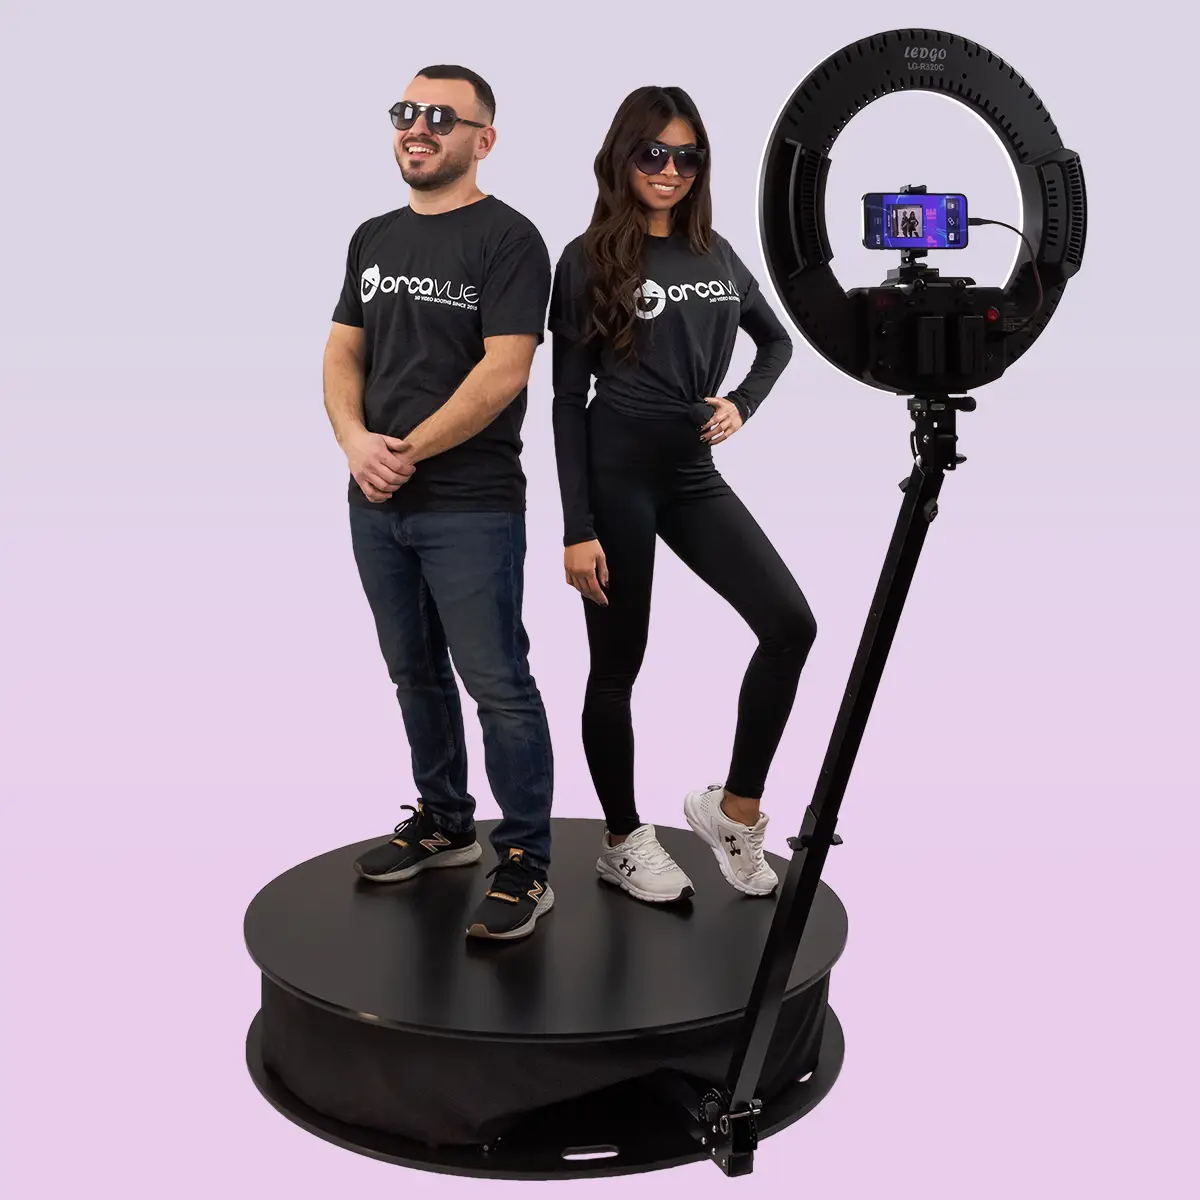 360 Photo Booth Made By OrcaVue with a male and female model striking a pose on the spinning platform